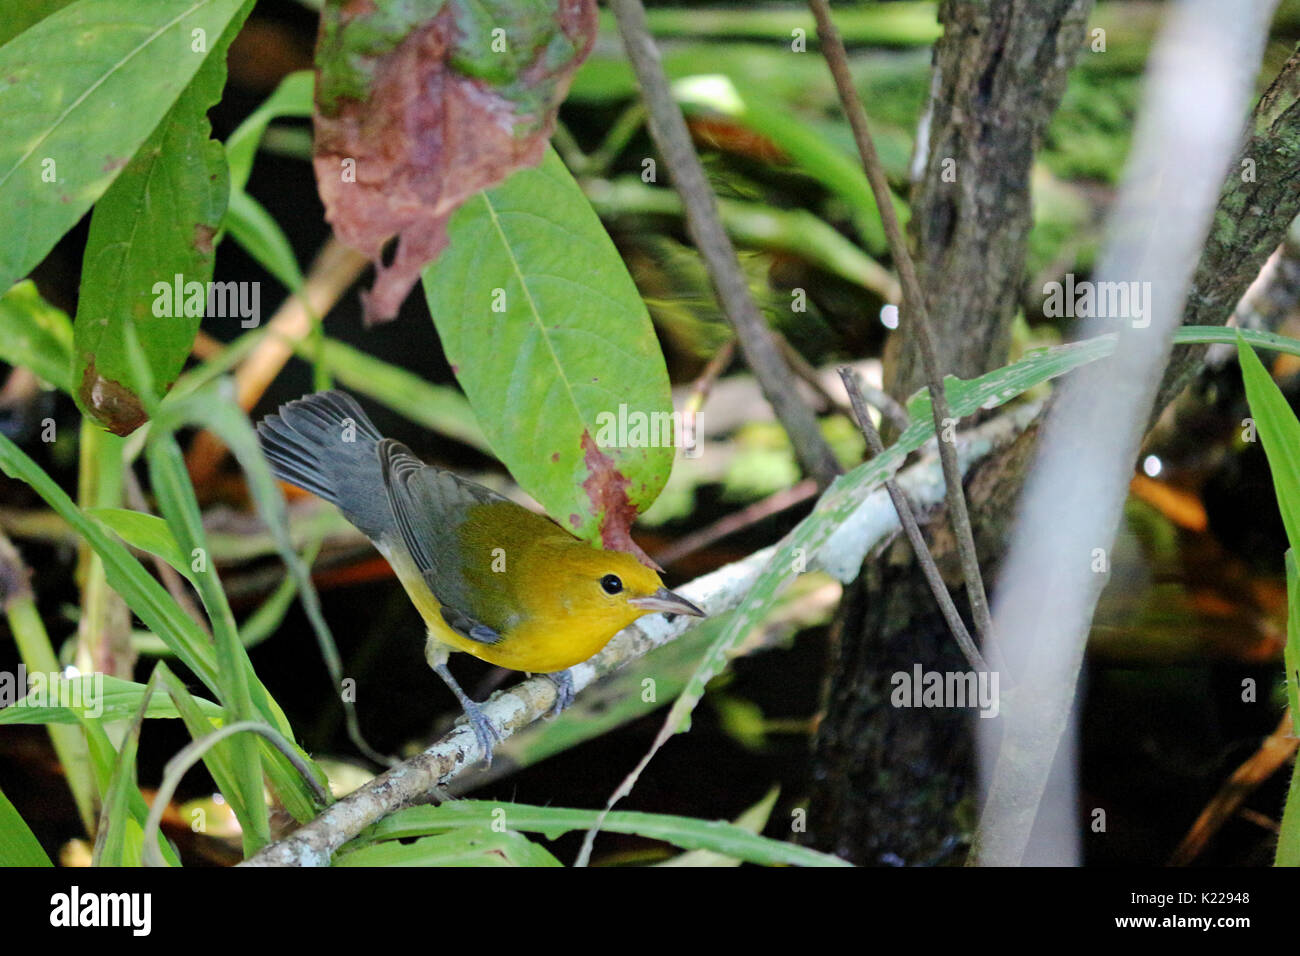 A Small Yellow and Blue Bird, A Warbler on the shore of a lake surrounded by natural leaves and branches, Stock Photo